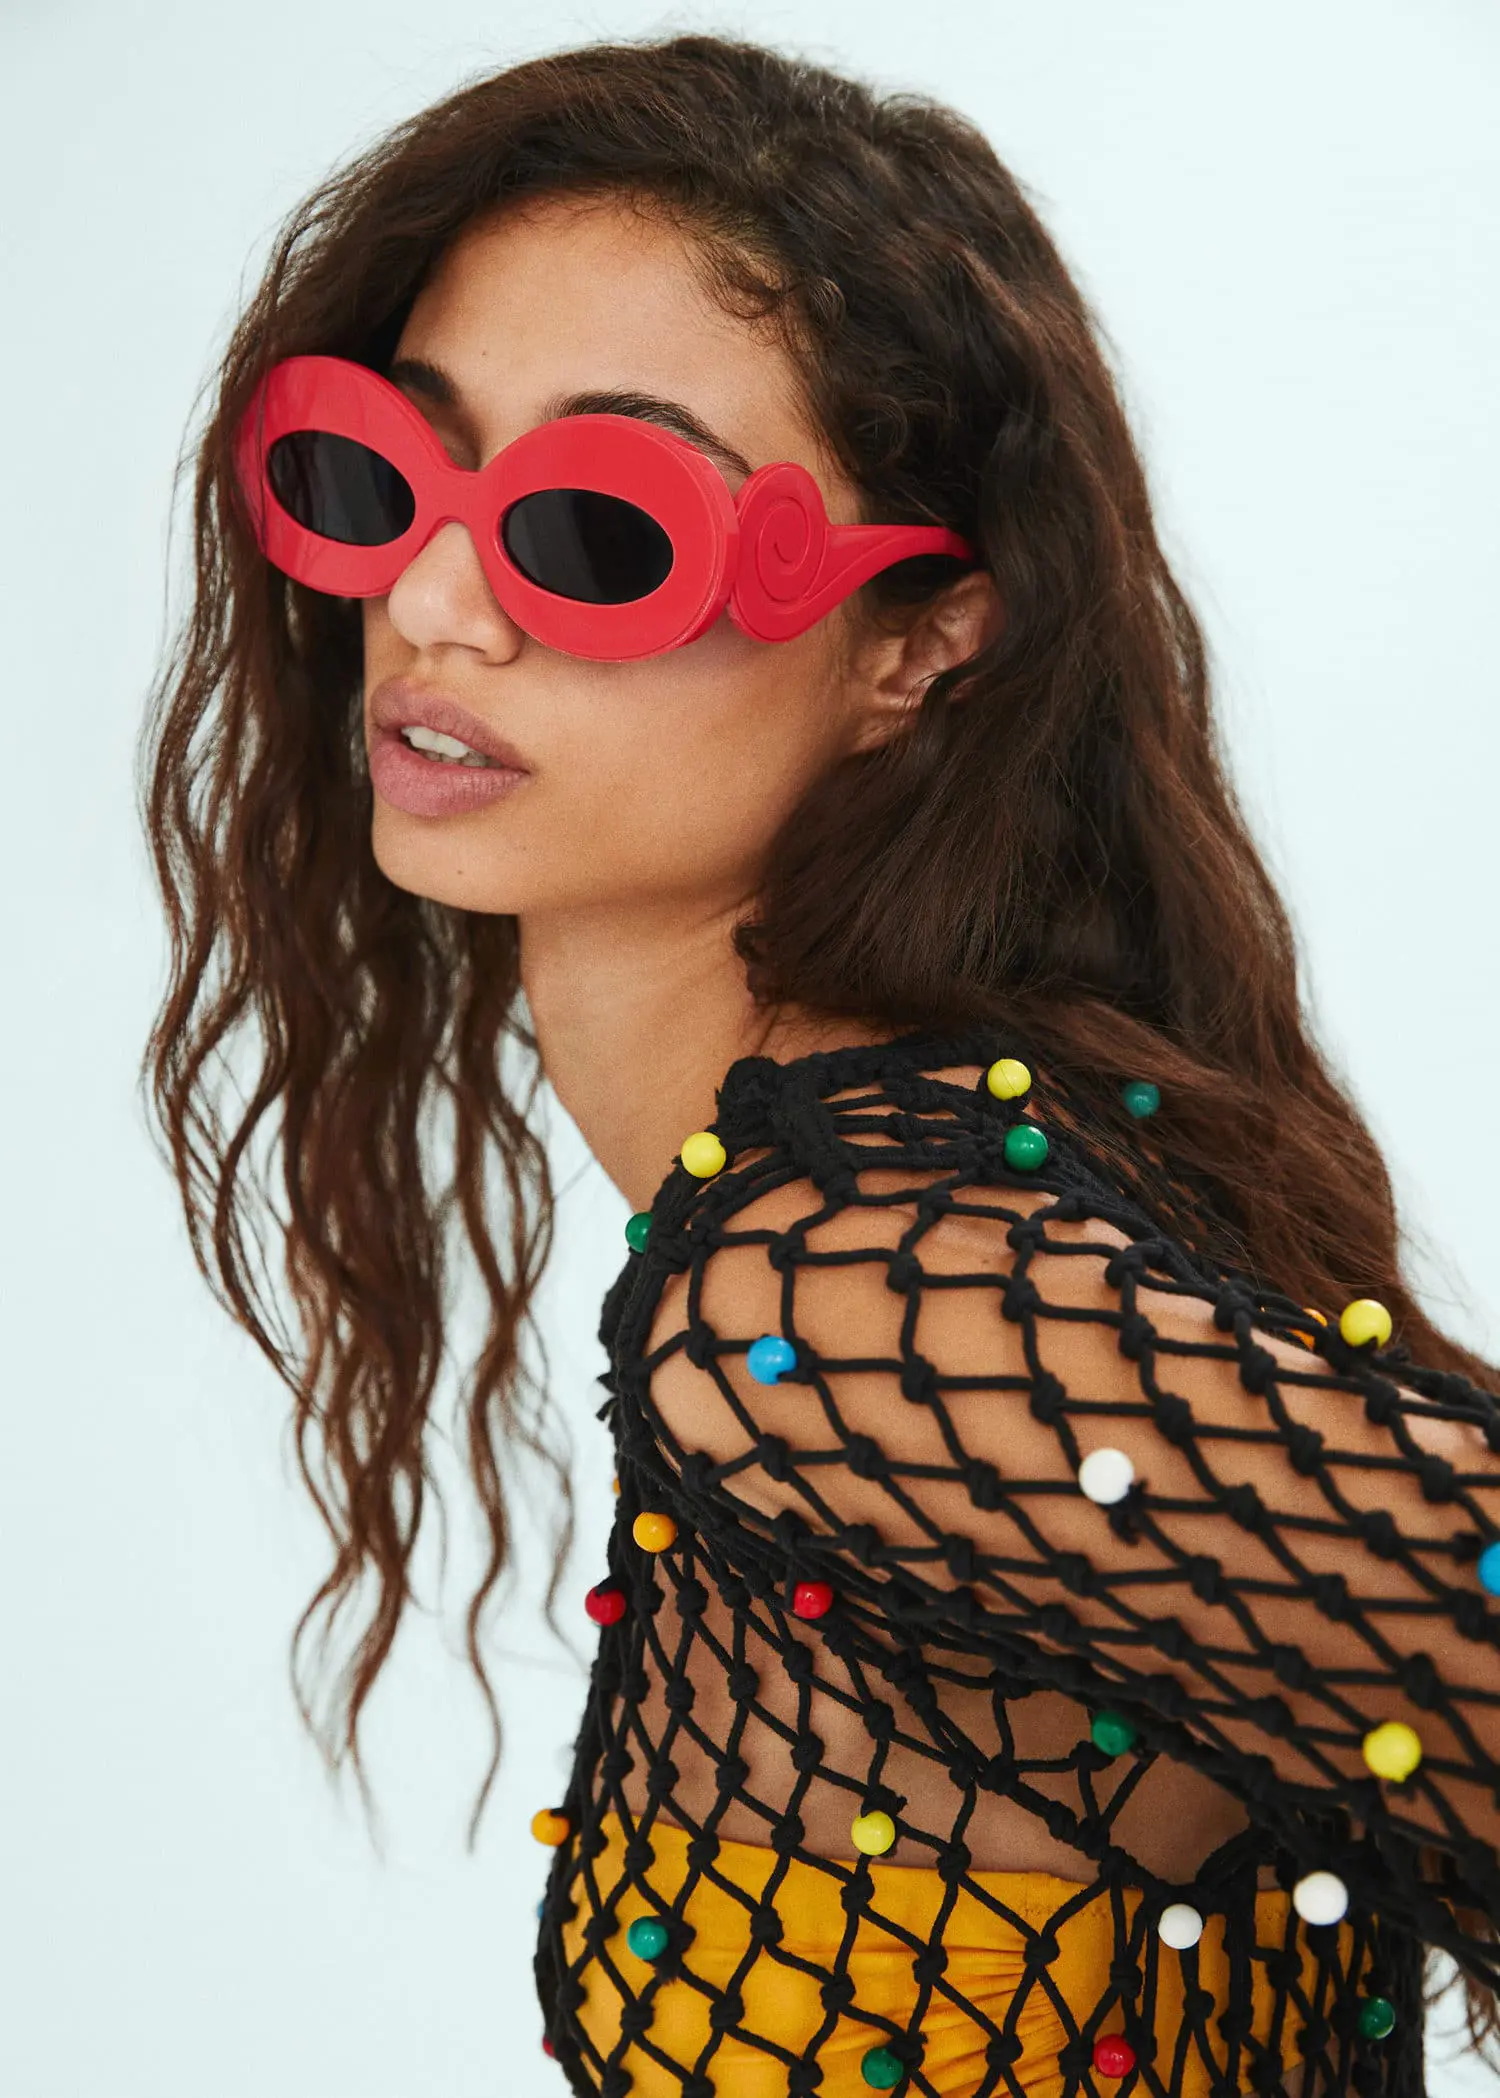 Mango Maxi-frame sunglasses. a woman wearing red sunglasses and fishnets. 